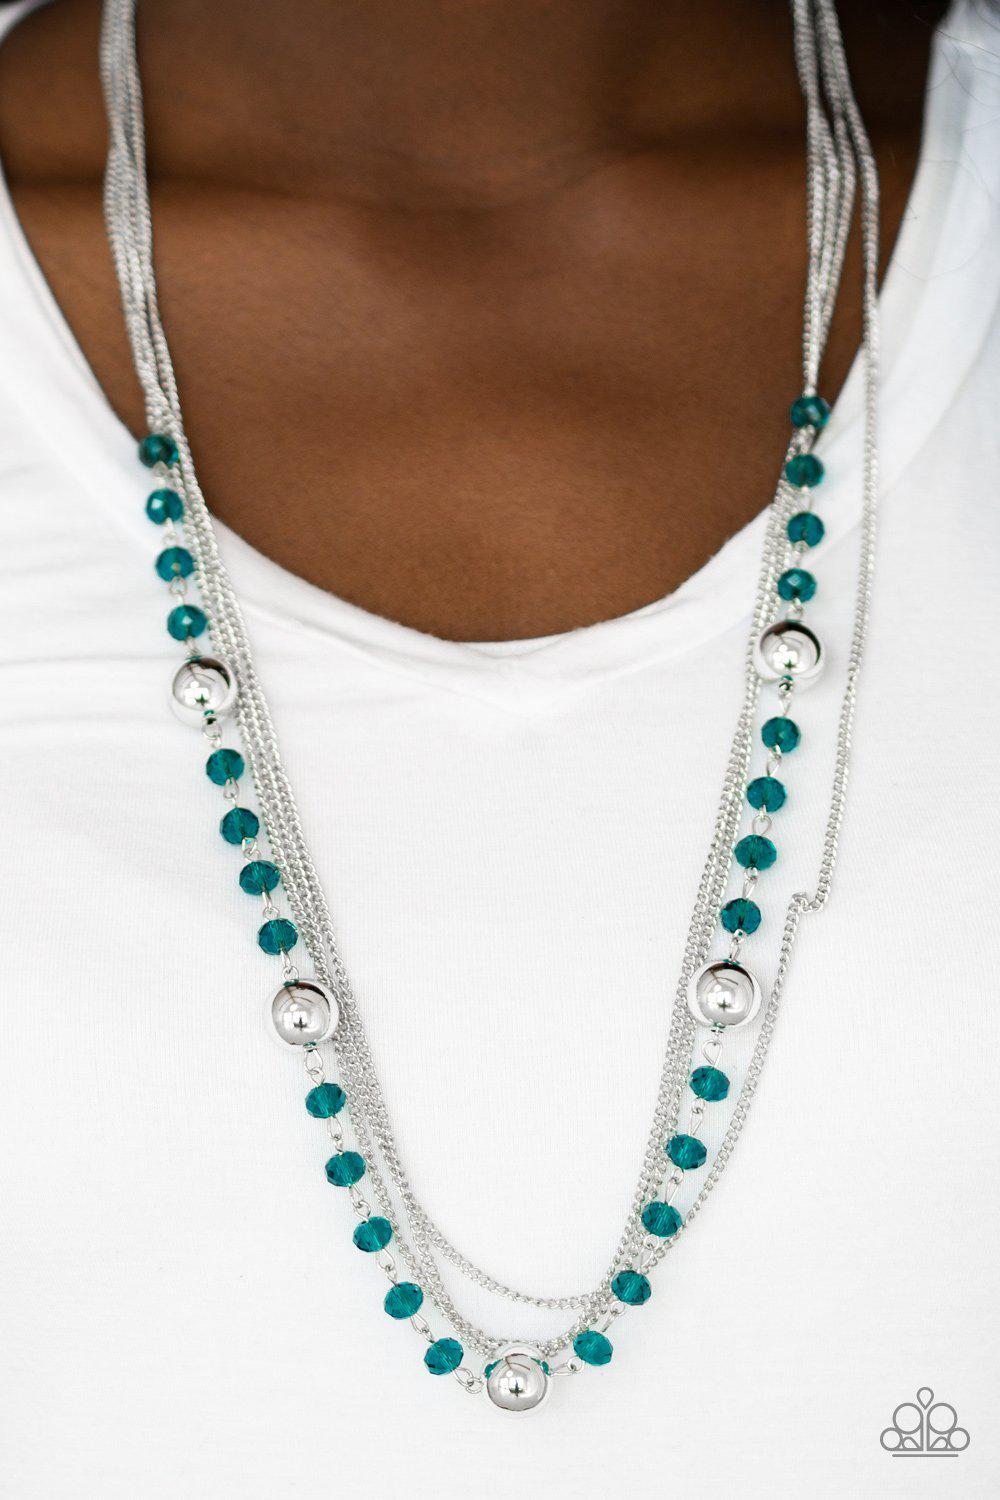 High Standards Blue Necklace - Paparazzi Accessories-CarasShop.com - $5 Jewelry by Cara Jewels